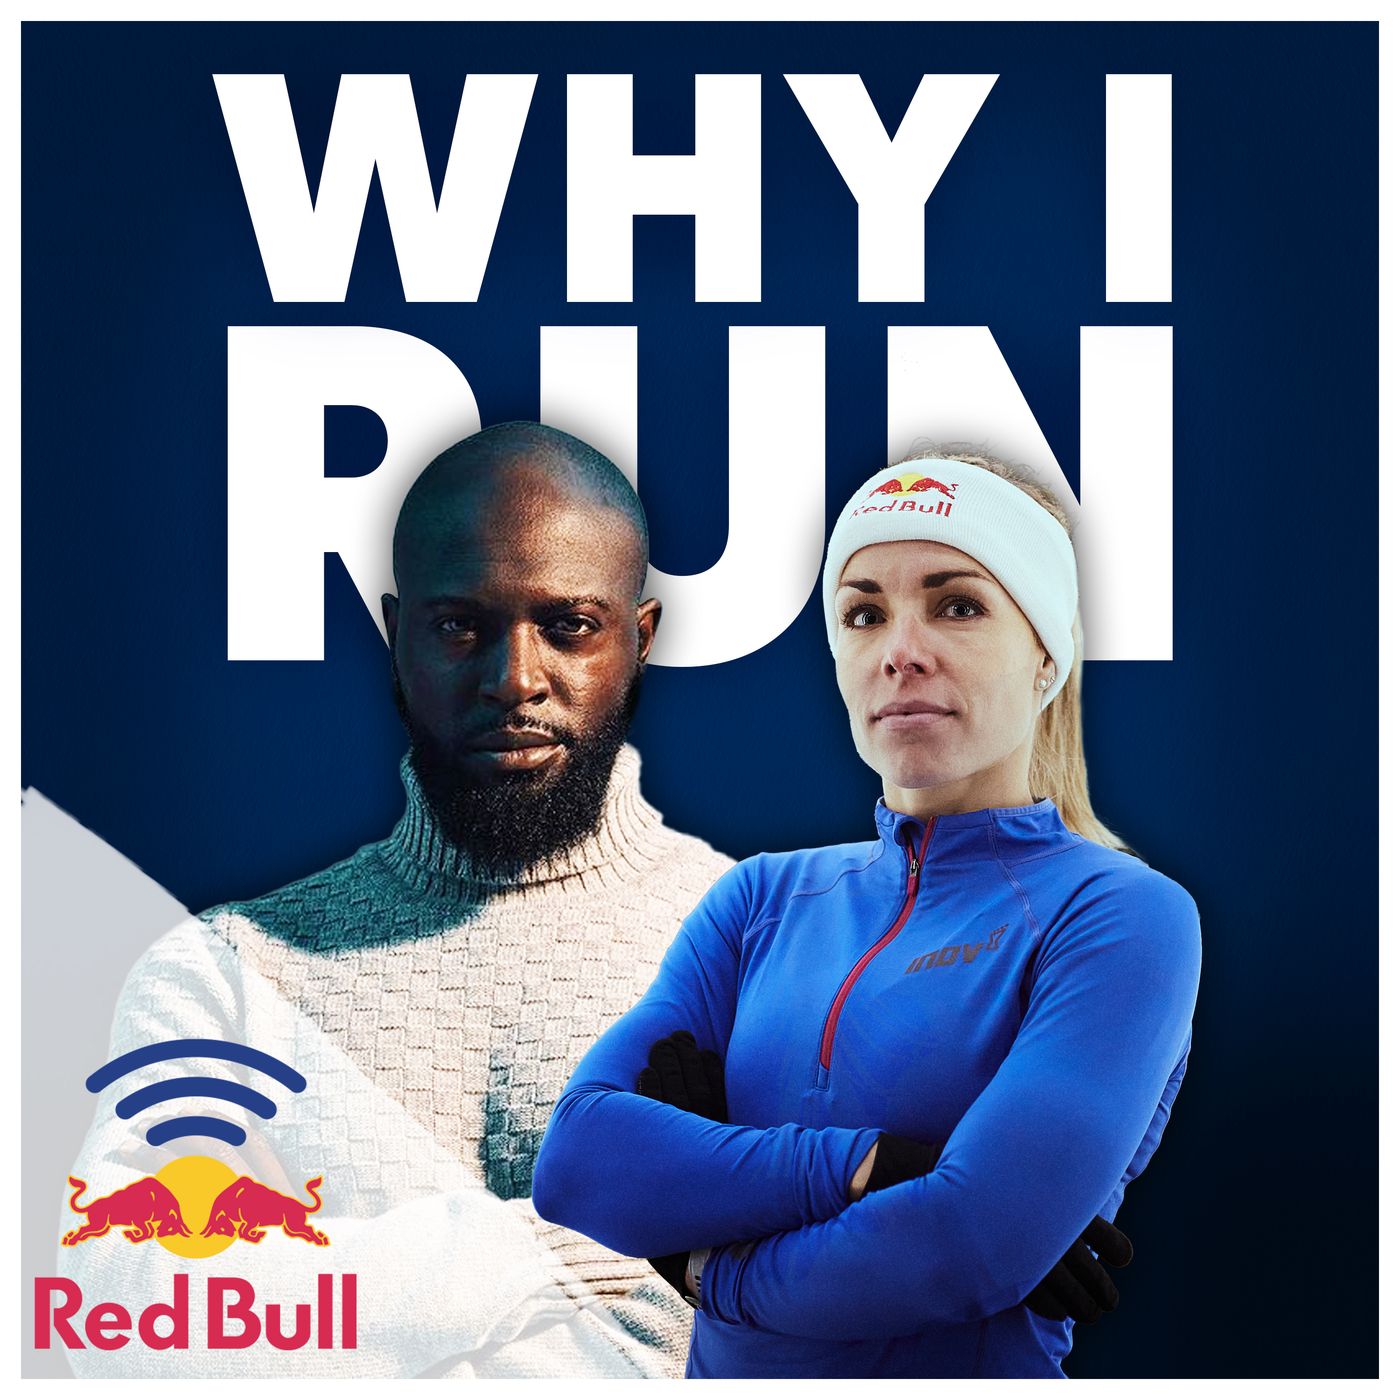 I run to explore with athlete Mario Rigby and racer Ida Mathilde Steensgaard